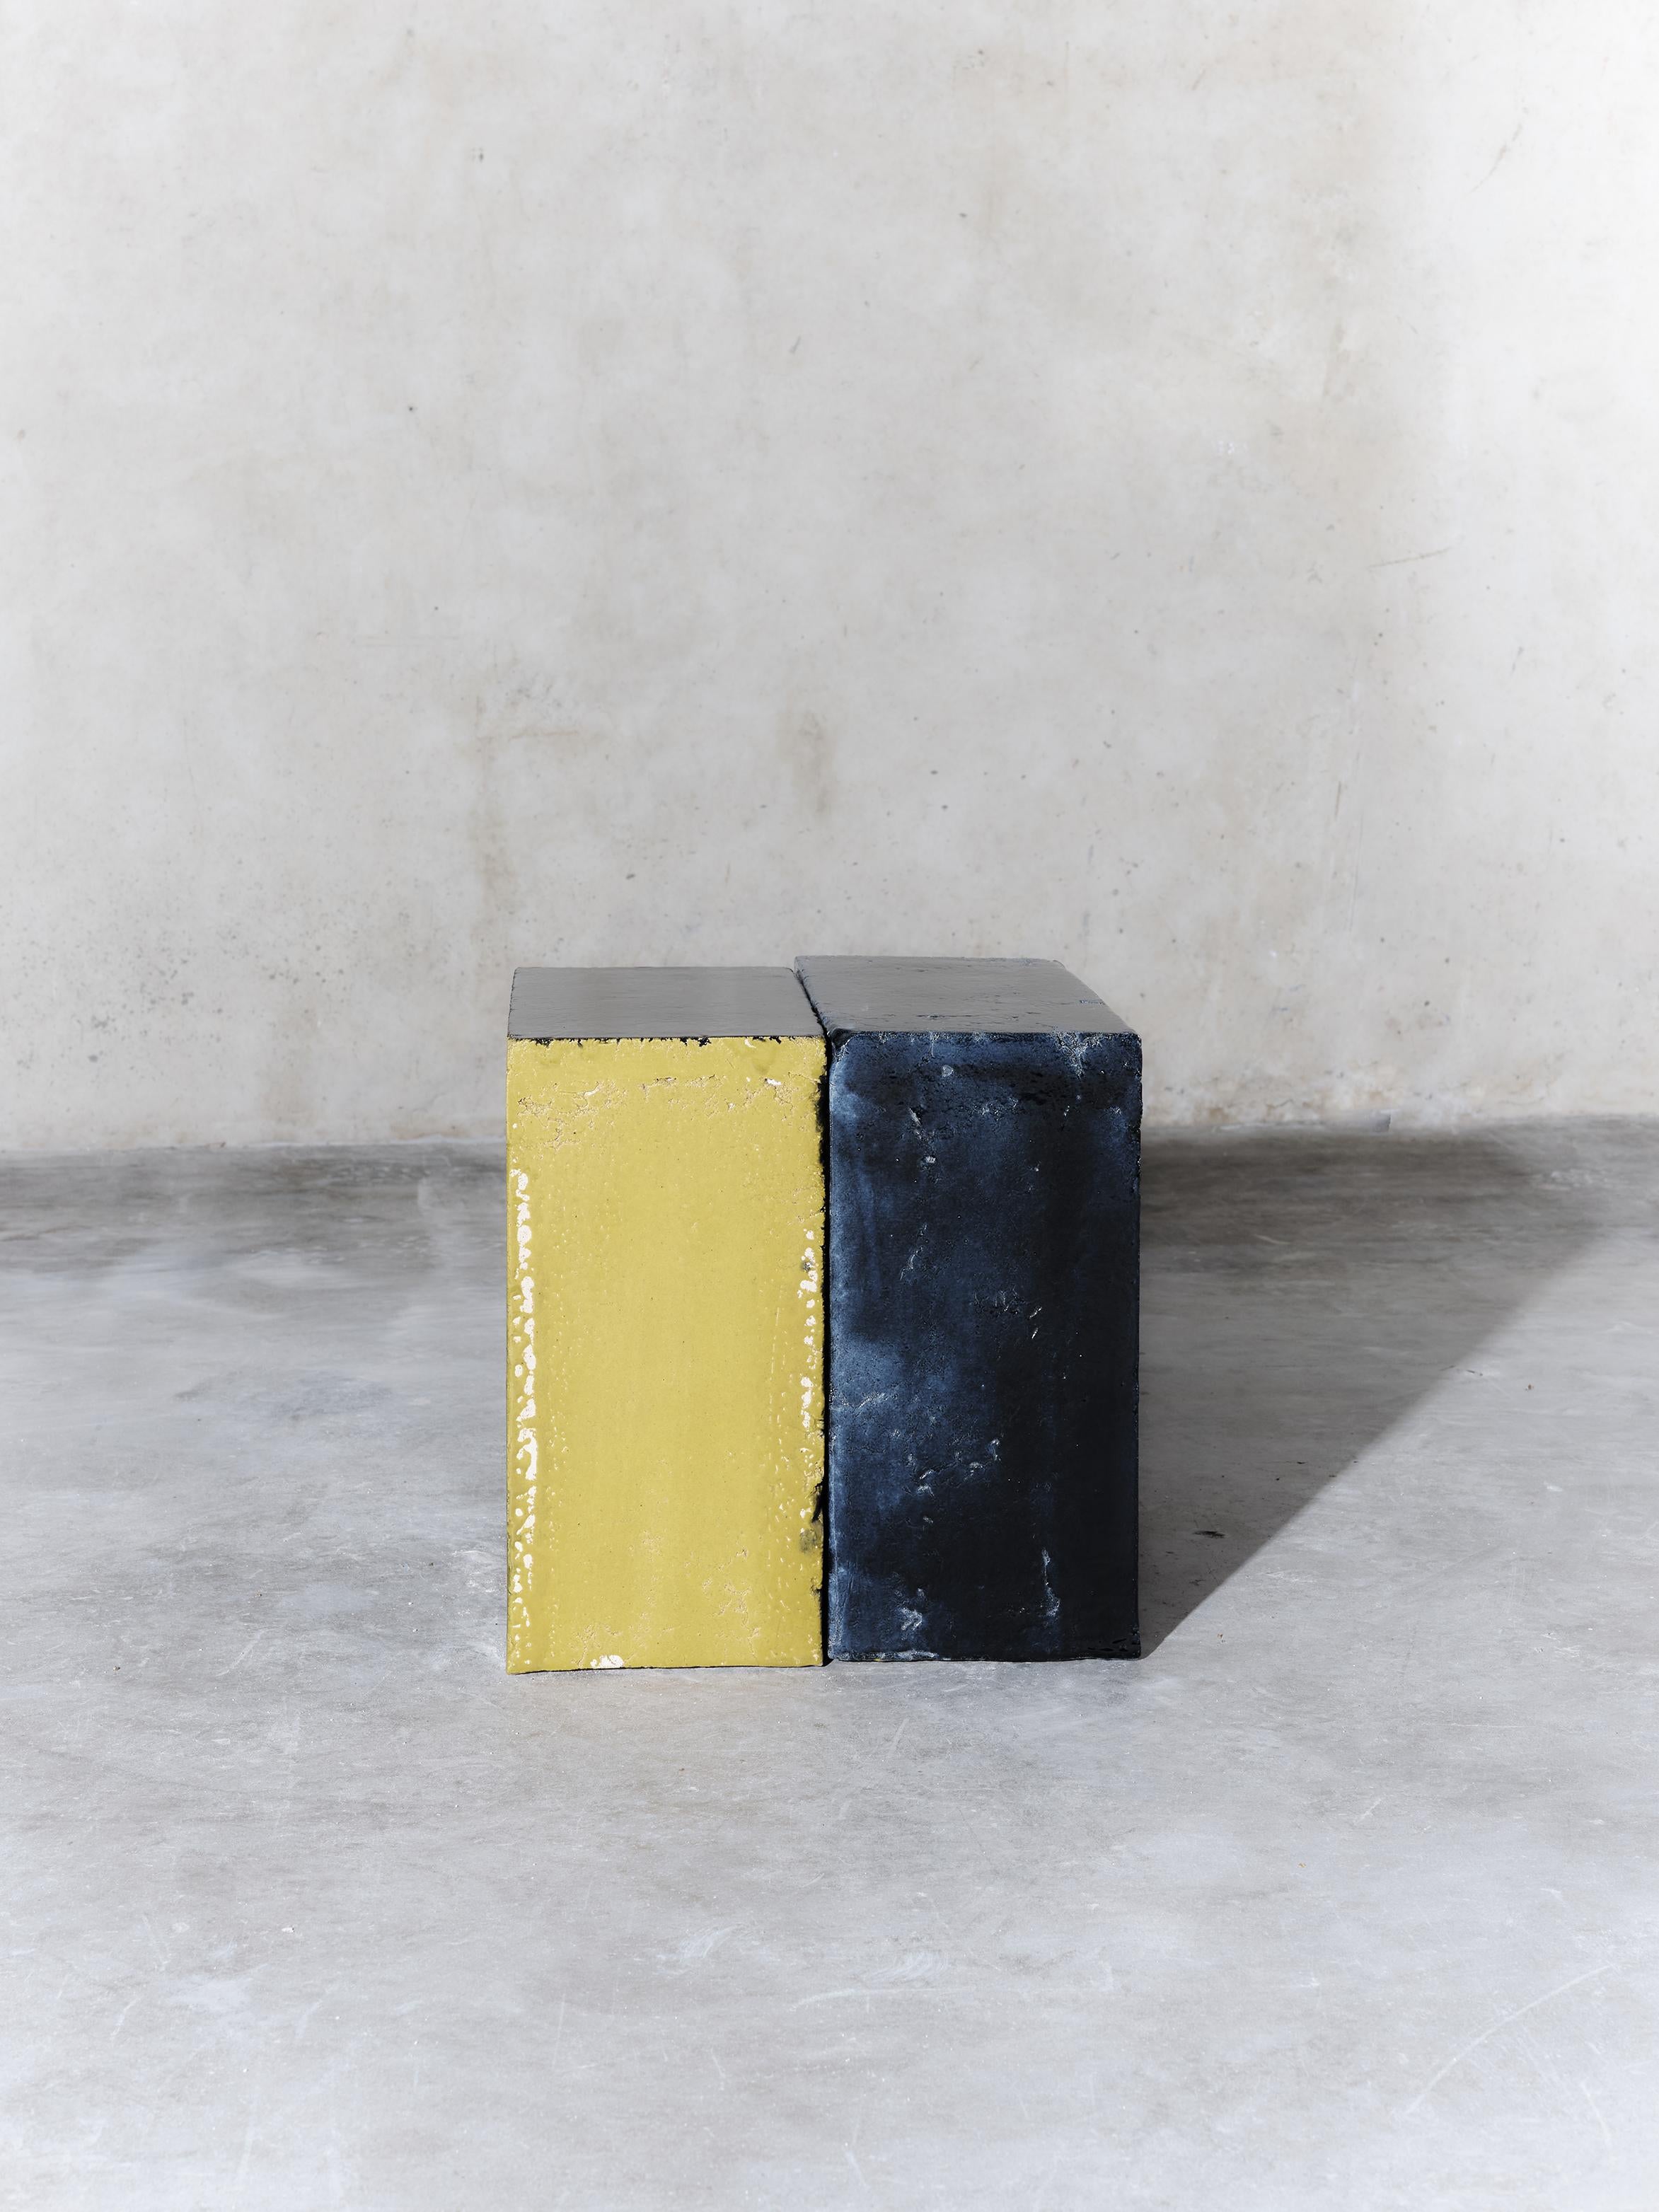 Handmade earthenware blue and yellow side table manufactured at the workshop of Apparatu in Barcelona. Different clay bodys are mixed with natural fibers like corn, straw, or heather straw. The pieces are casted by hand, creating a thick and strong